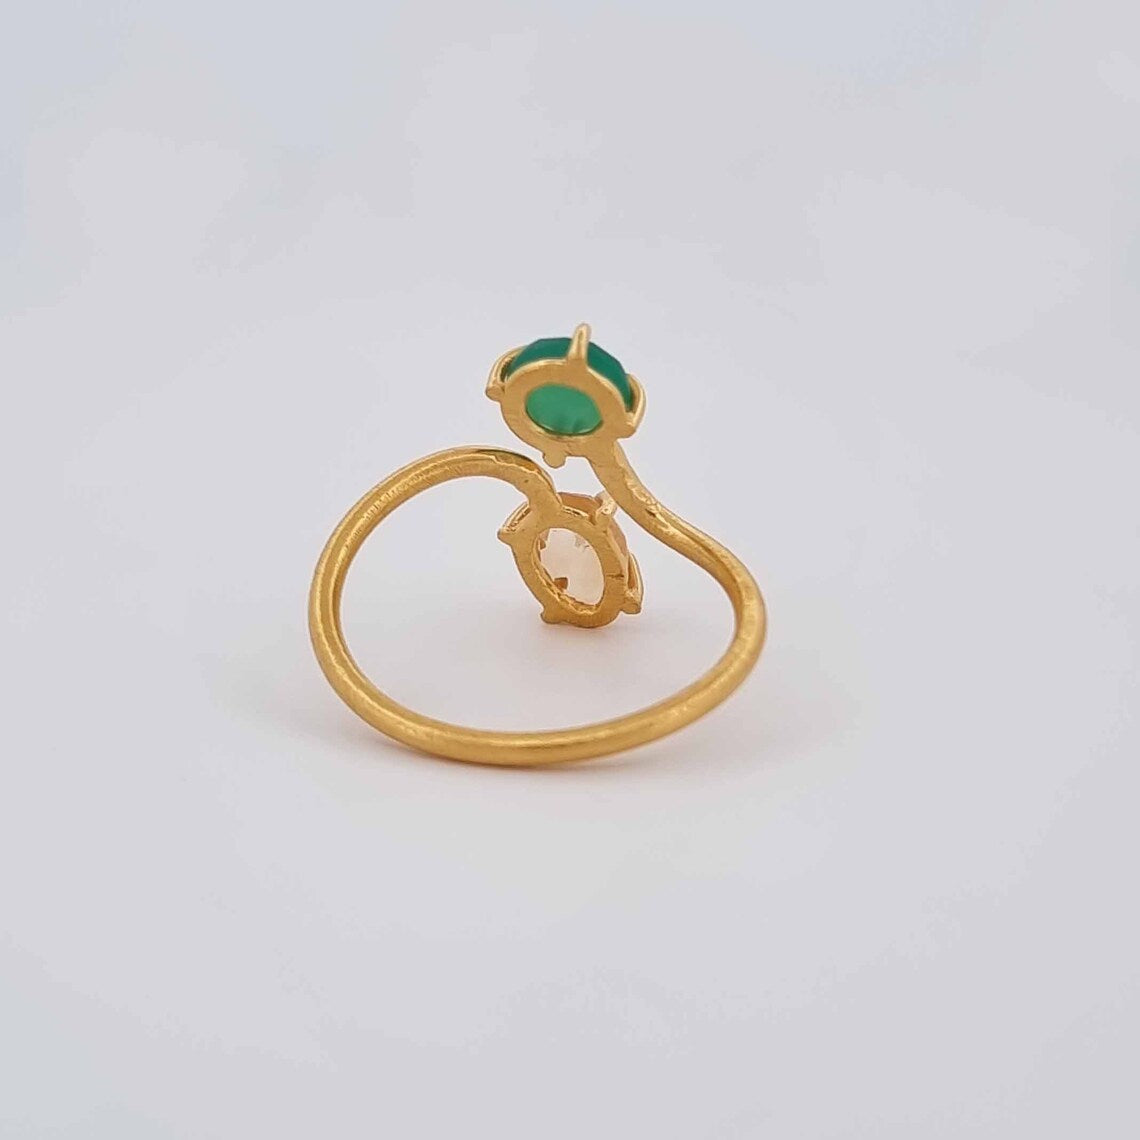 Natural Citrine Ring, Green Onyx Citrine Ring, Gold Ring, Dual Stone Ring, Handmade Ring, Statement Ring For Women's, Gold Plated Ring Adjustable